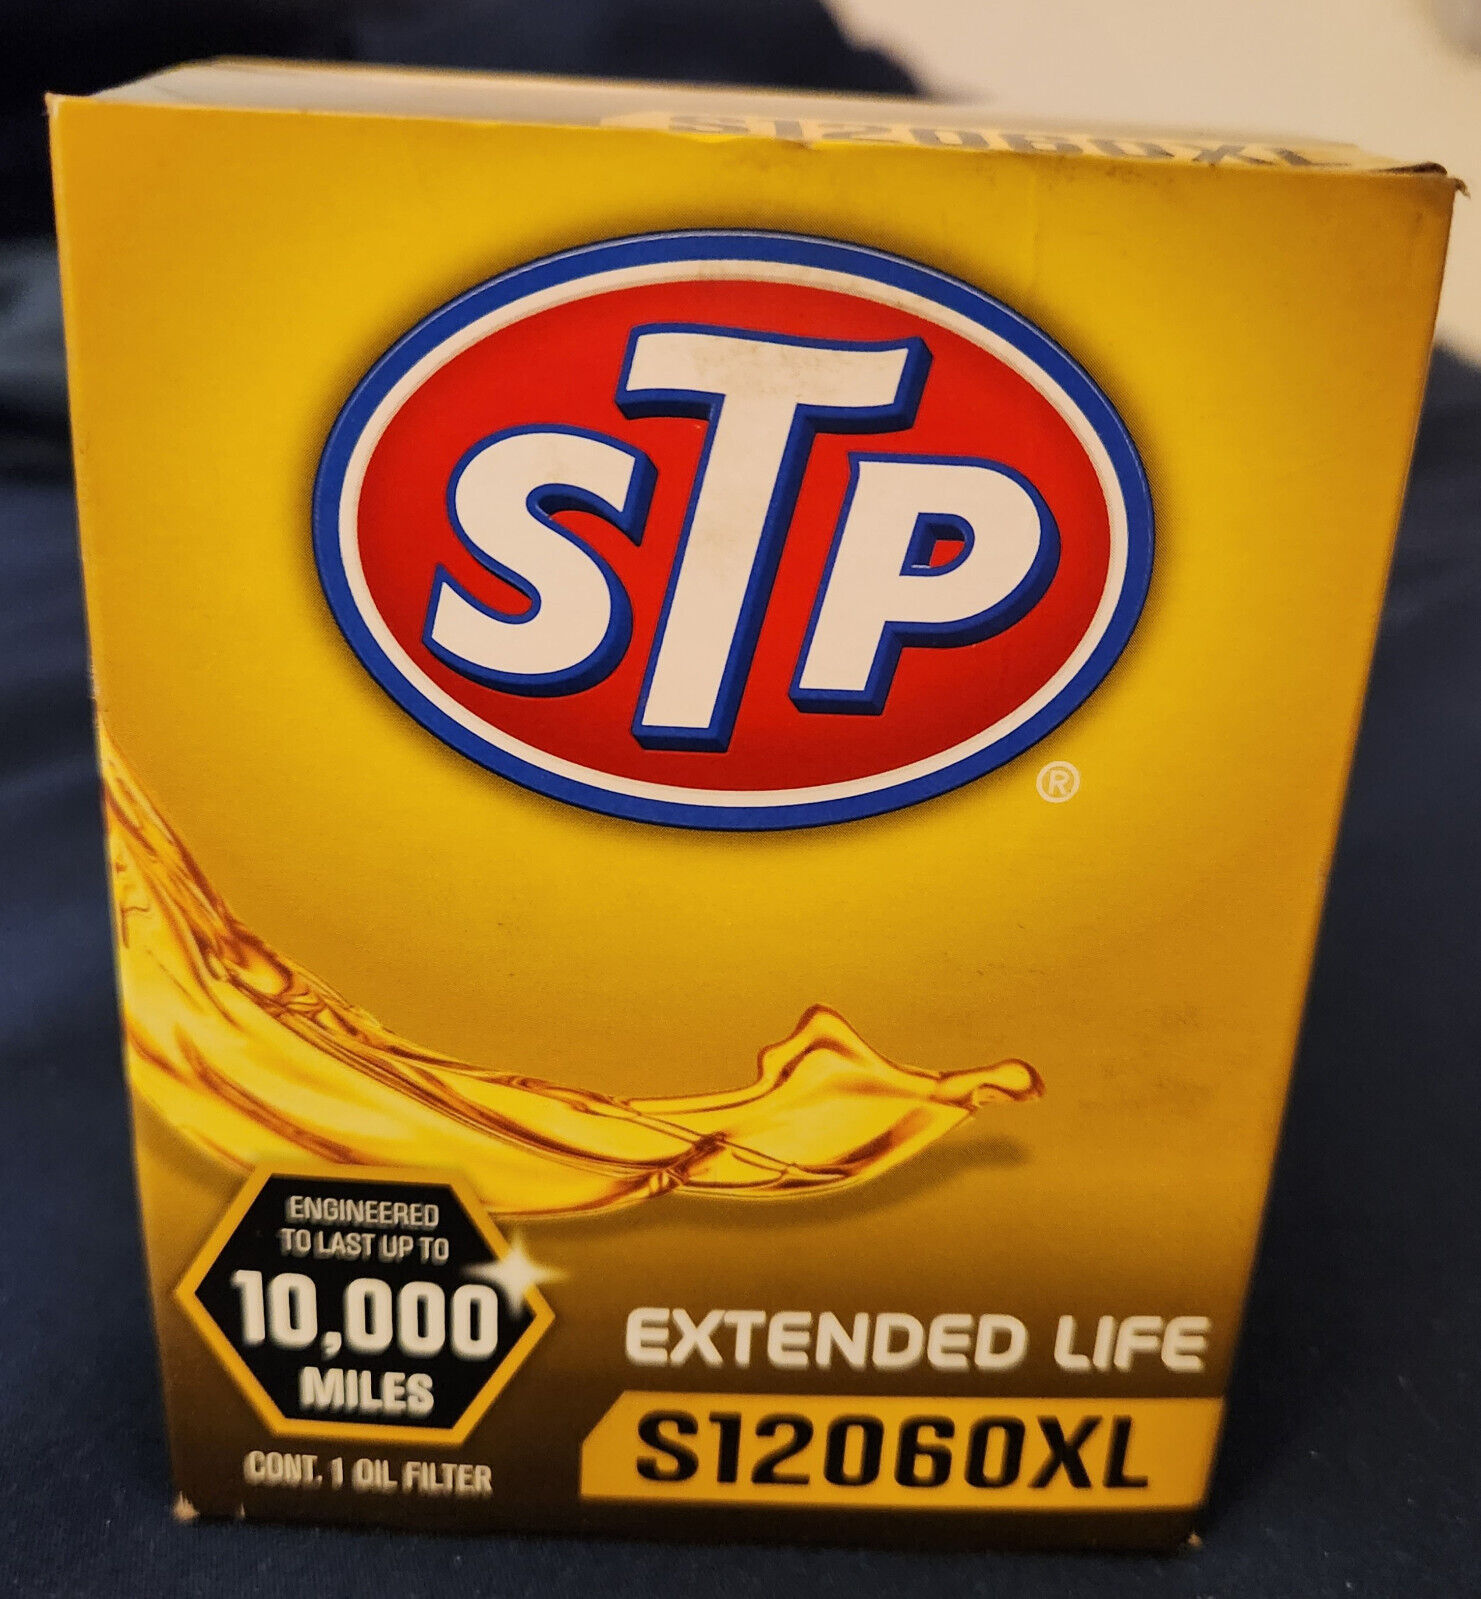 STP Extended Life Oil Filter S12060XL